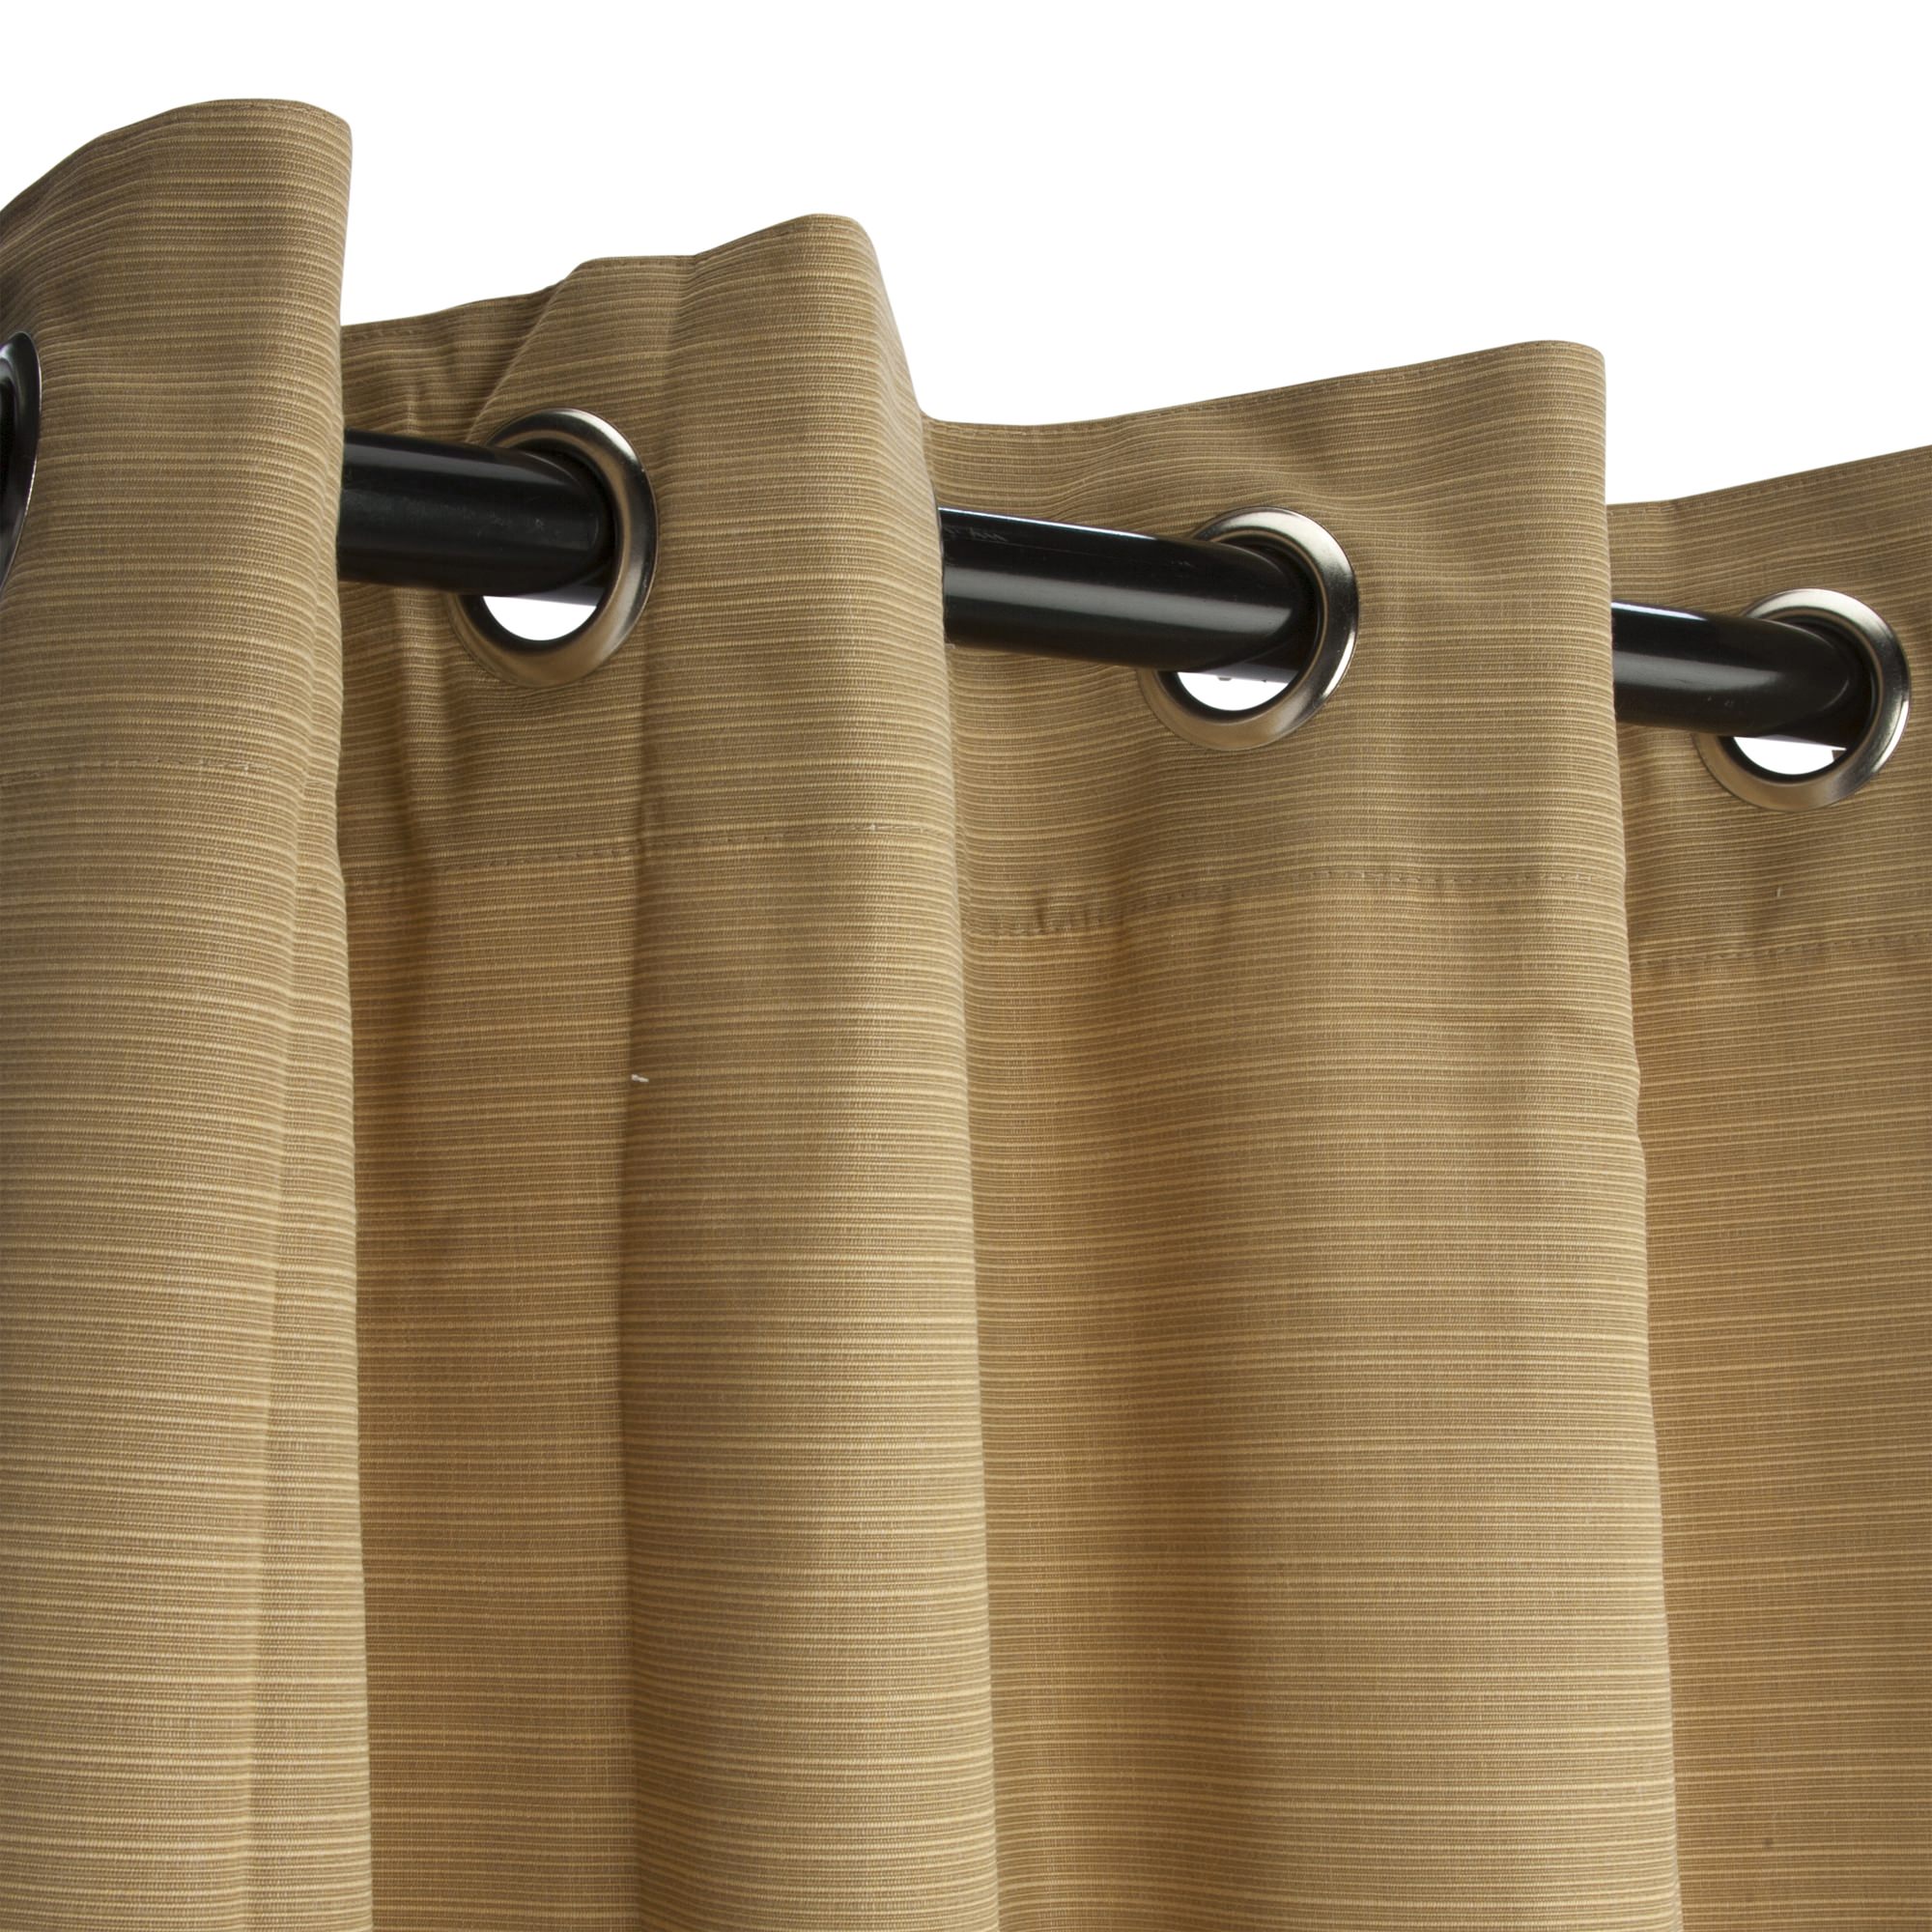 Shop Sunbrella Dupione Bamboo Outdoor Curtain with Nickel Plated